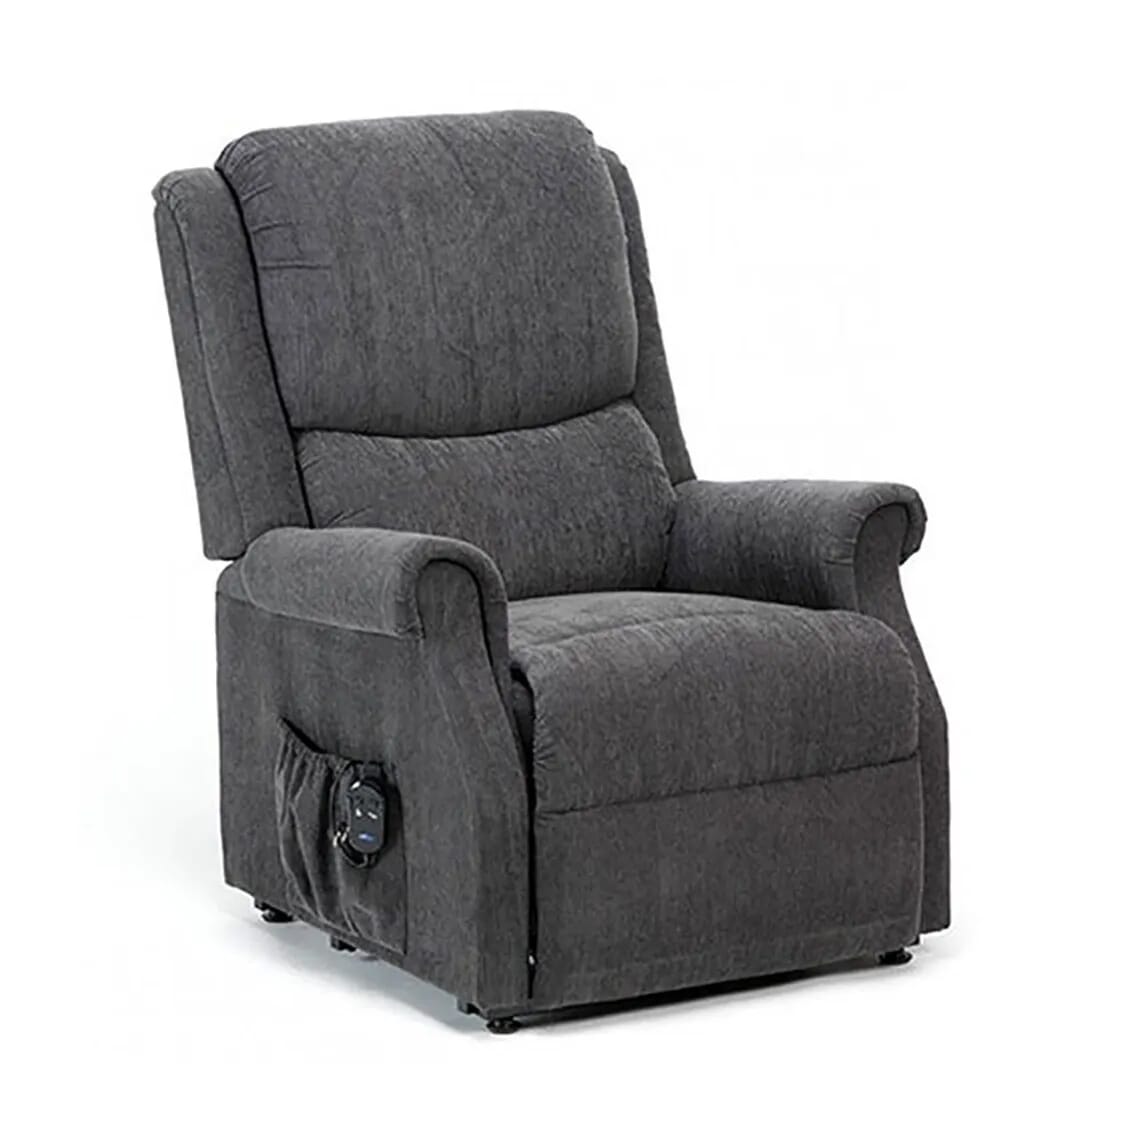 View Indiana Rise and Recline Chair Standard Charcoal information